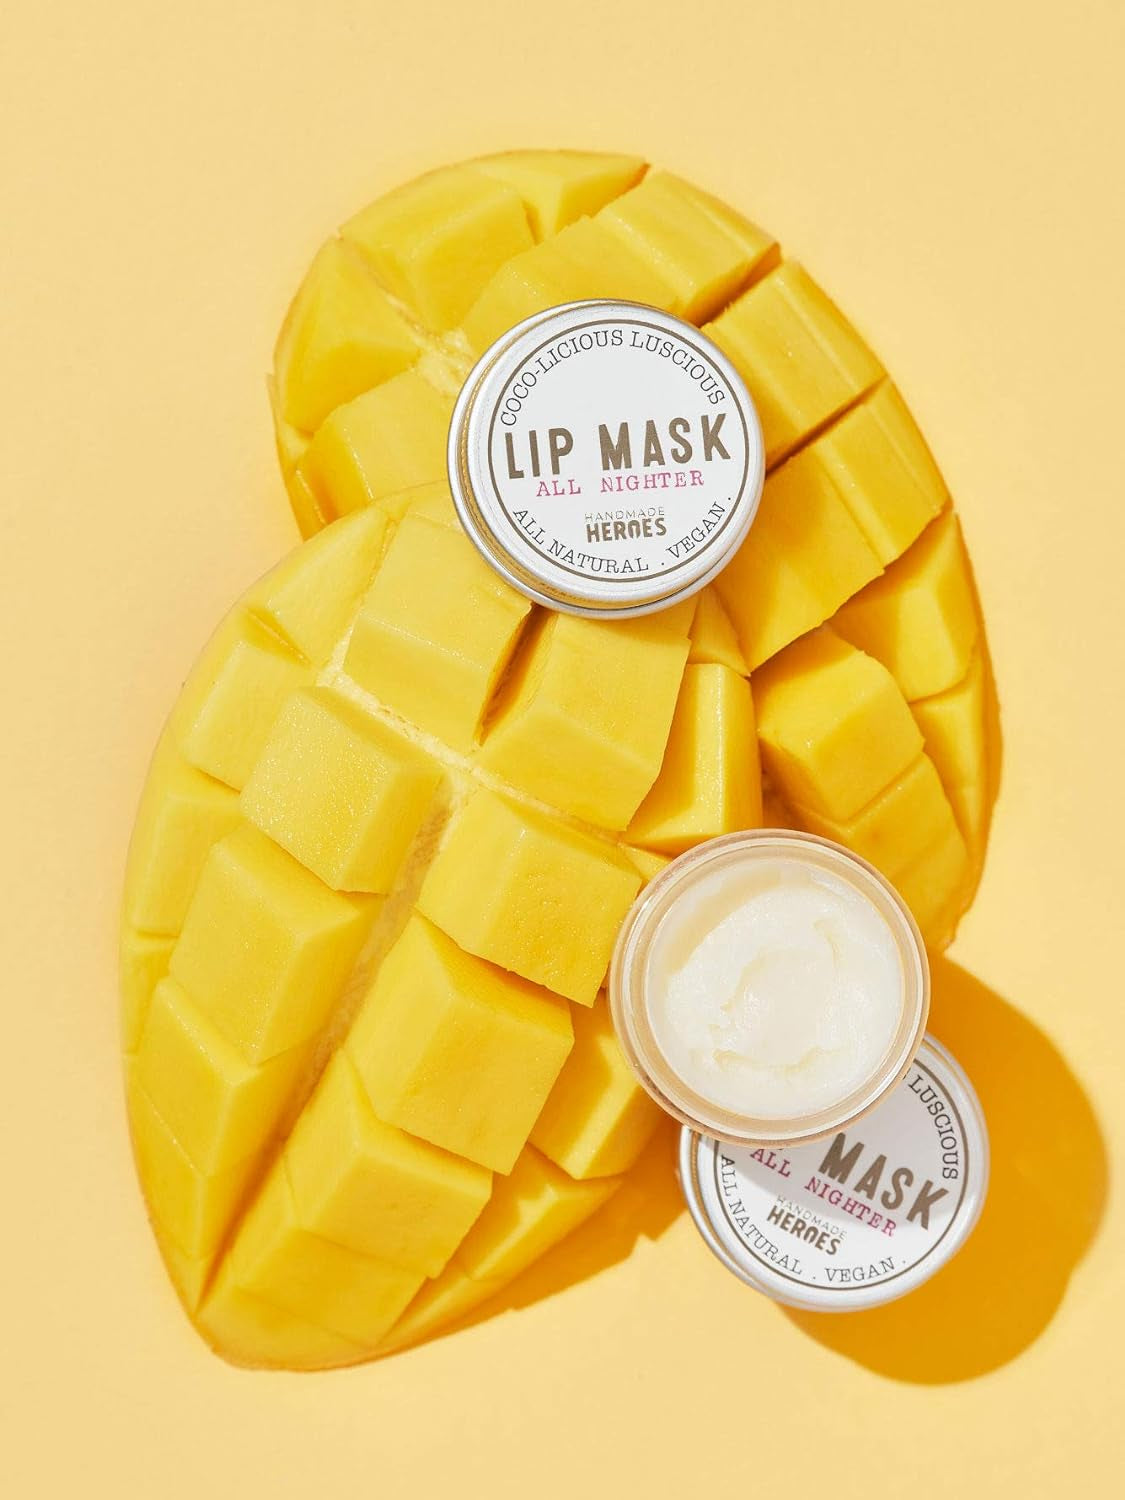 Save 15% -  Lip Mask and Cuticle Oil Bundle - Clean Sustainable Skincare Lip Treatment and Nail Care